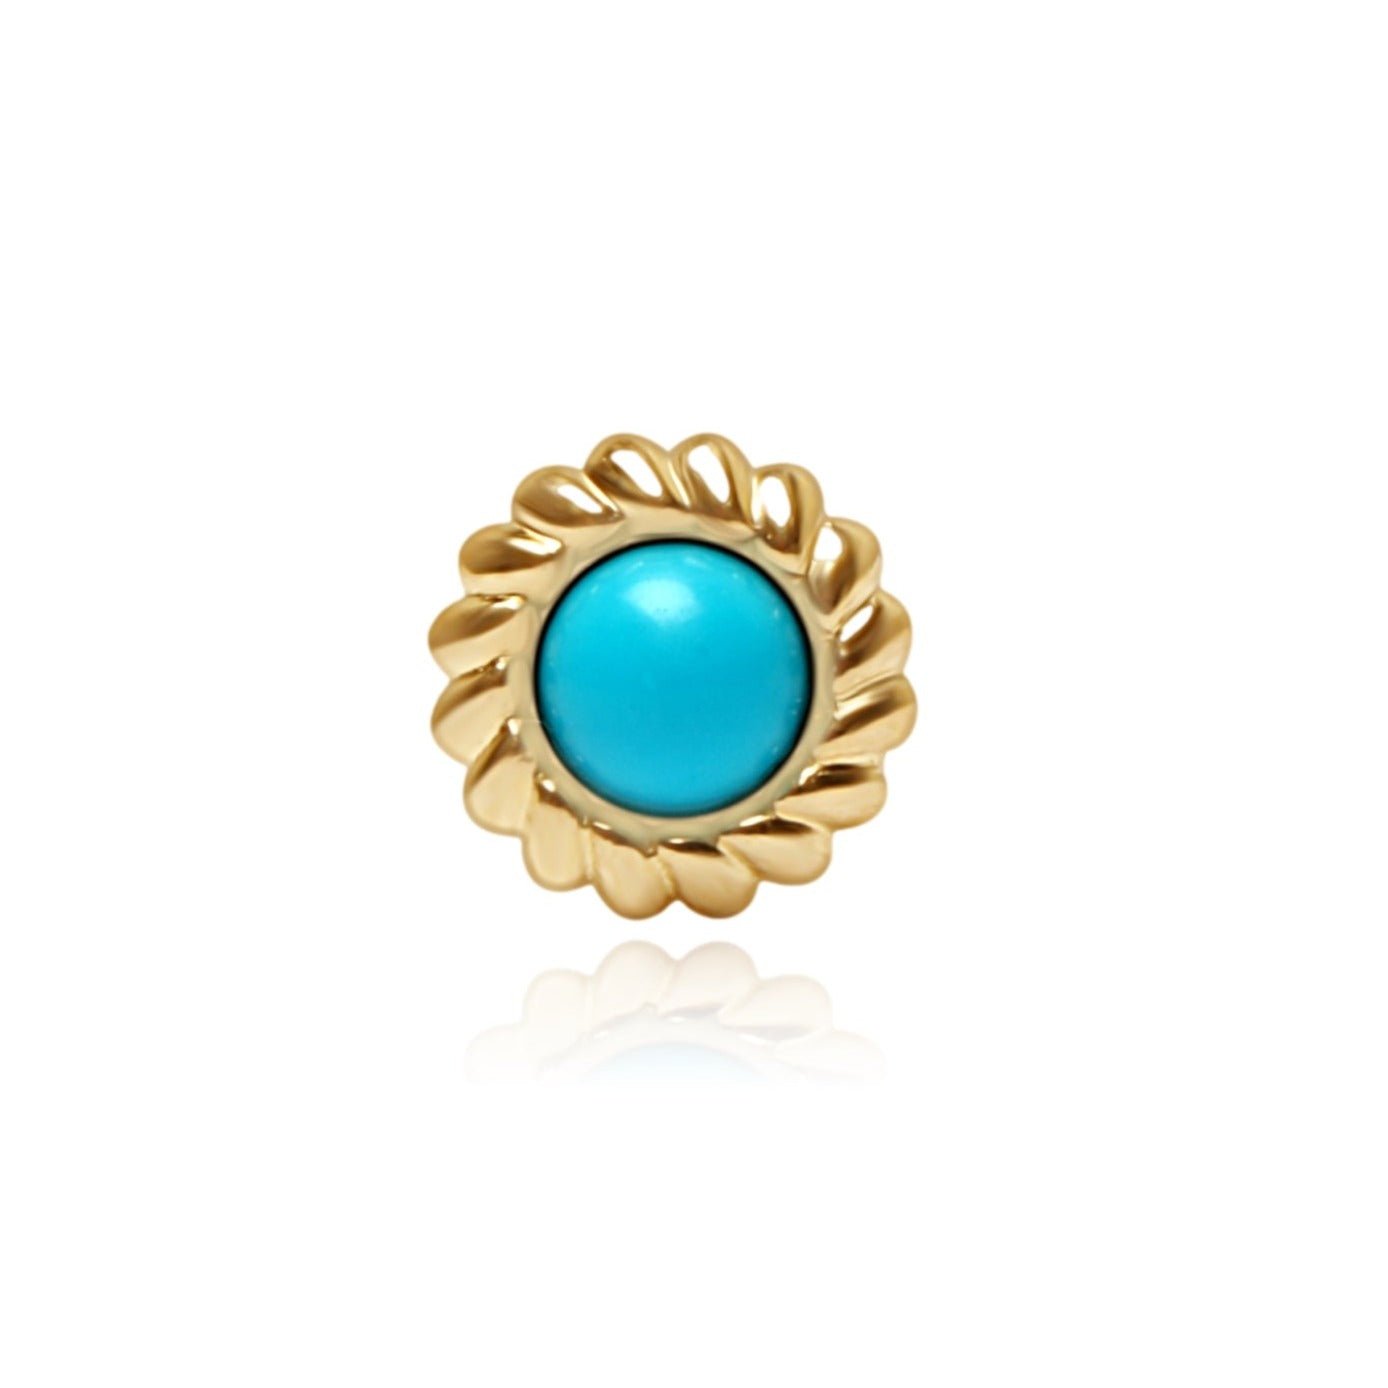 Turquoise Flat Back Stud in Braided Bezel Set Solid 14k Gold Earrings Estella Collection #product_description# 17942 14k Birthstone Cartilage Earring #tag4# #tag5# #tag6# #tag7# #tag8# #tag9# #tag10# 5MM